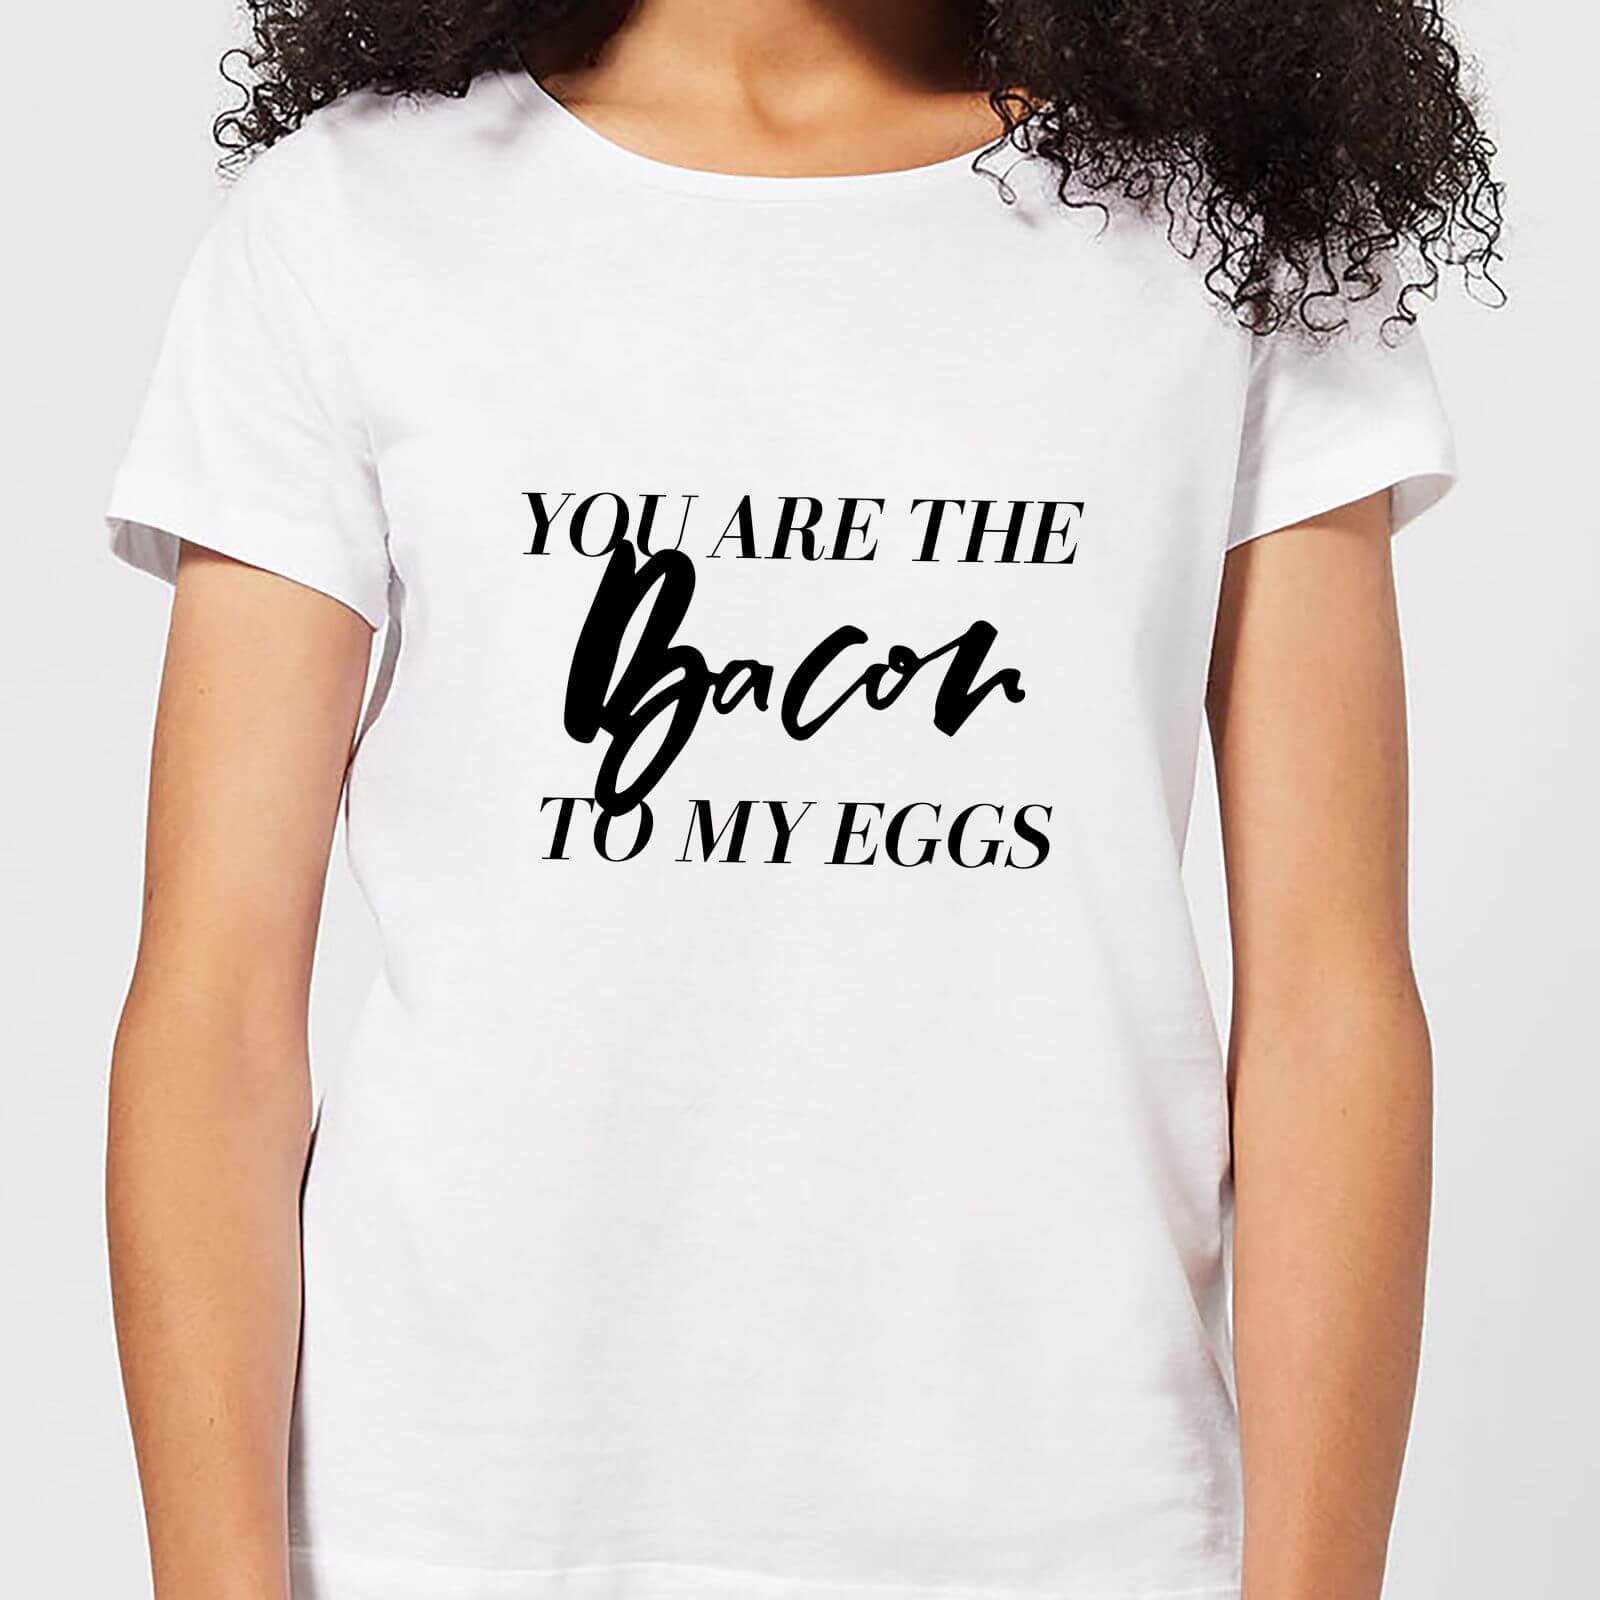 You Are The Bacon To My Eggs Women's T-Shirt - White - S - White